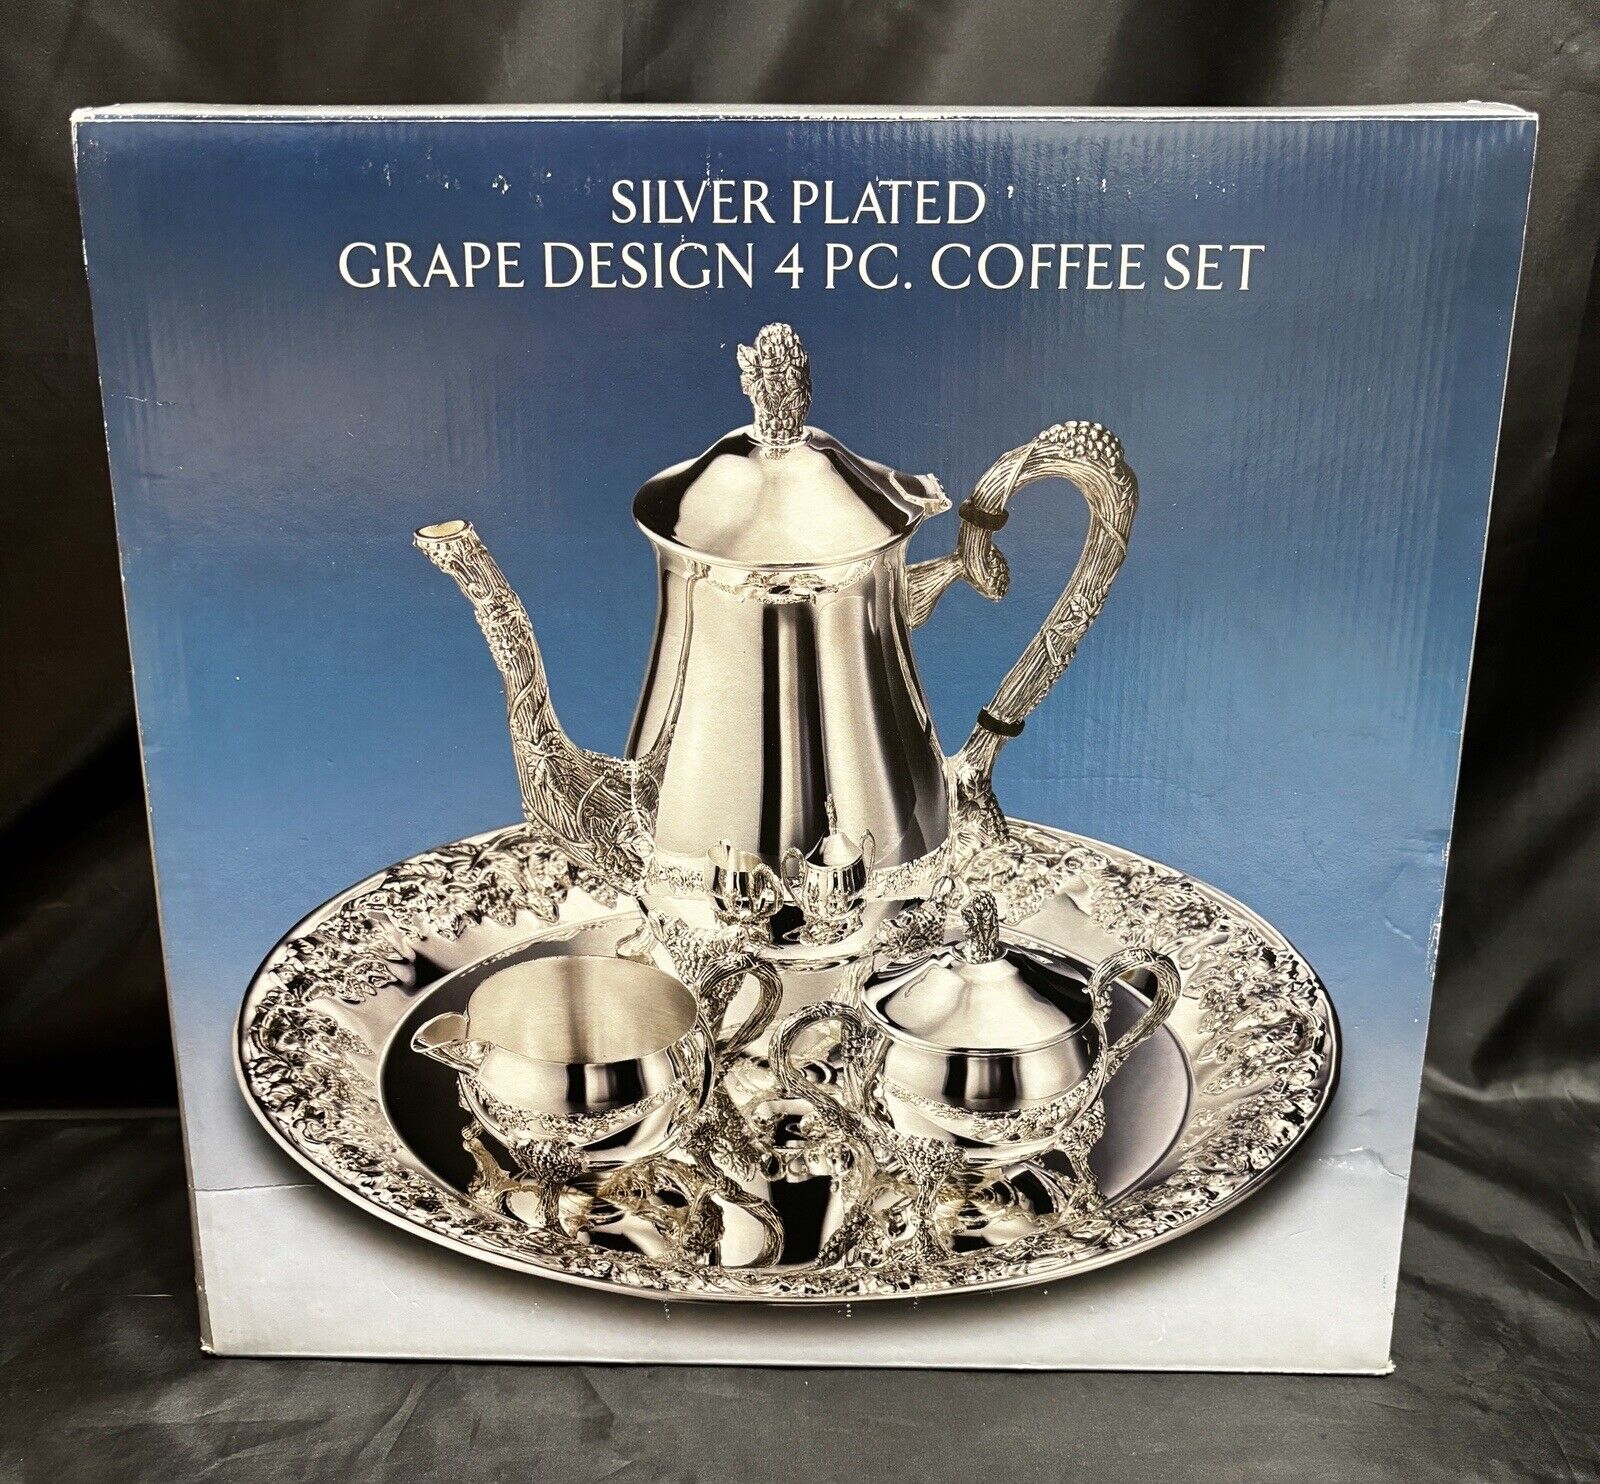 New In Box Godinger Silver Plated 4 Piece Coffee Set With Elaborate Grape Design